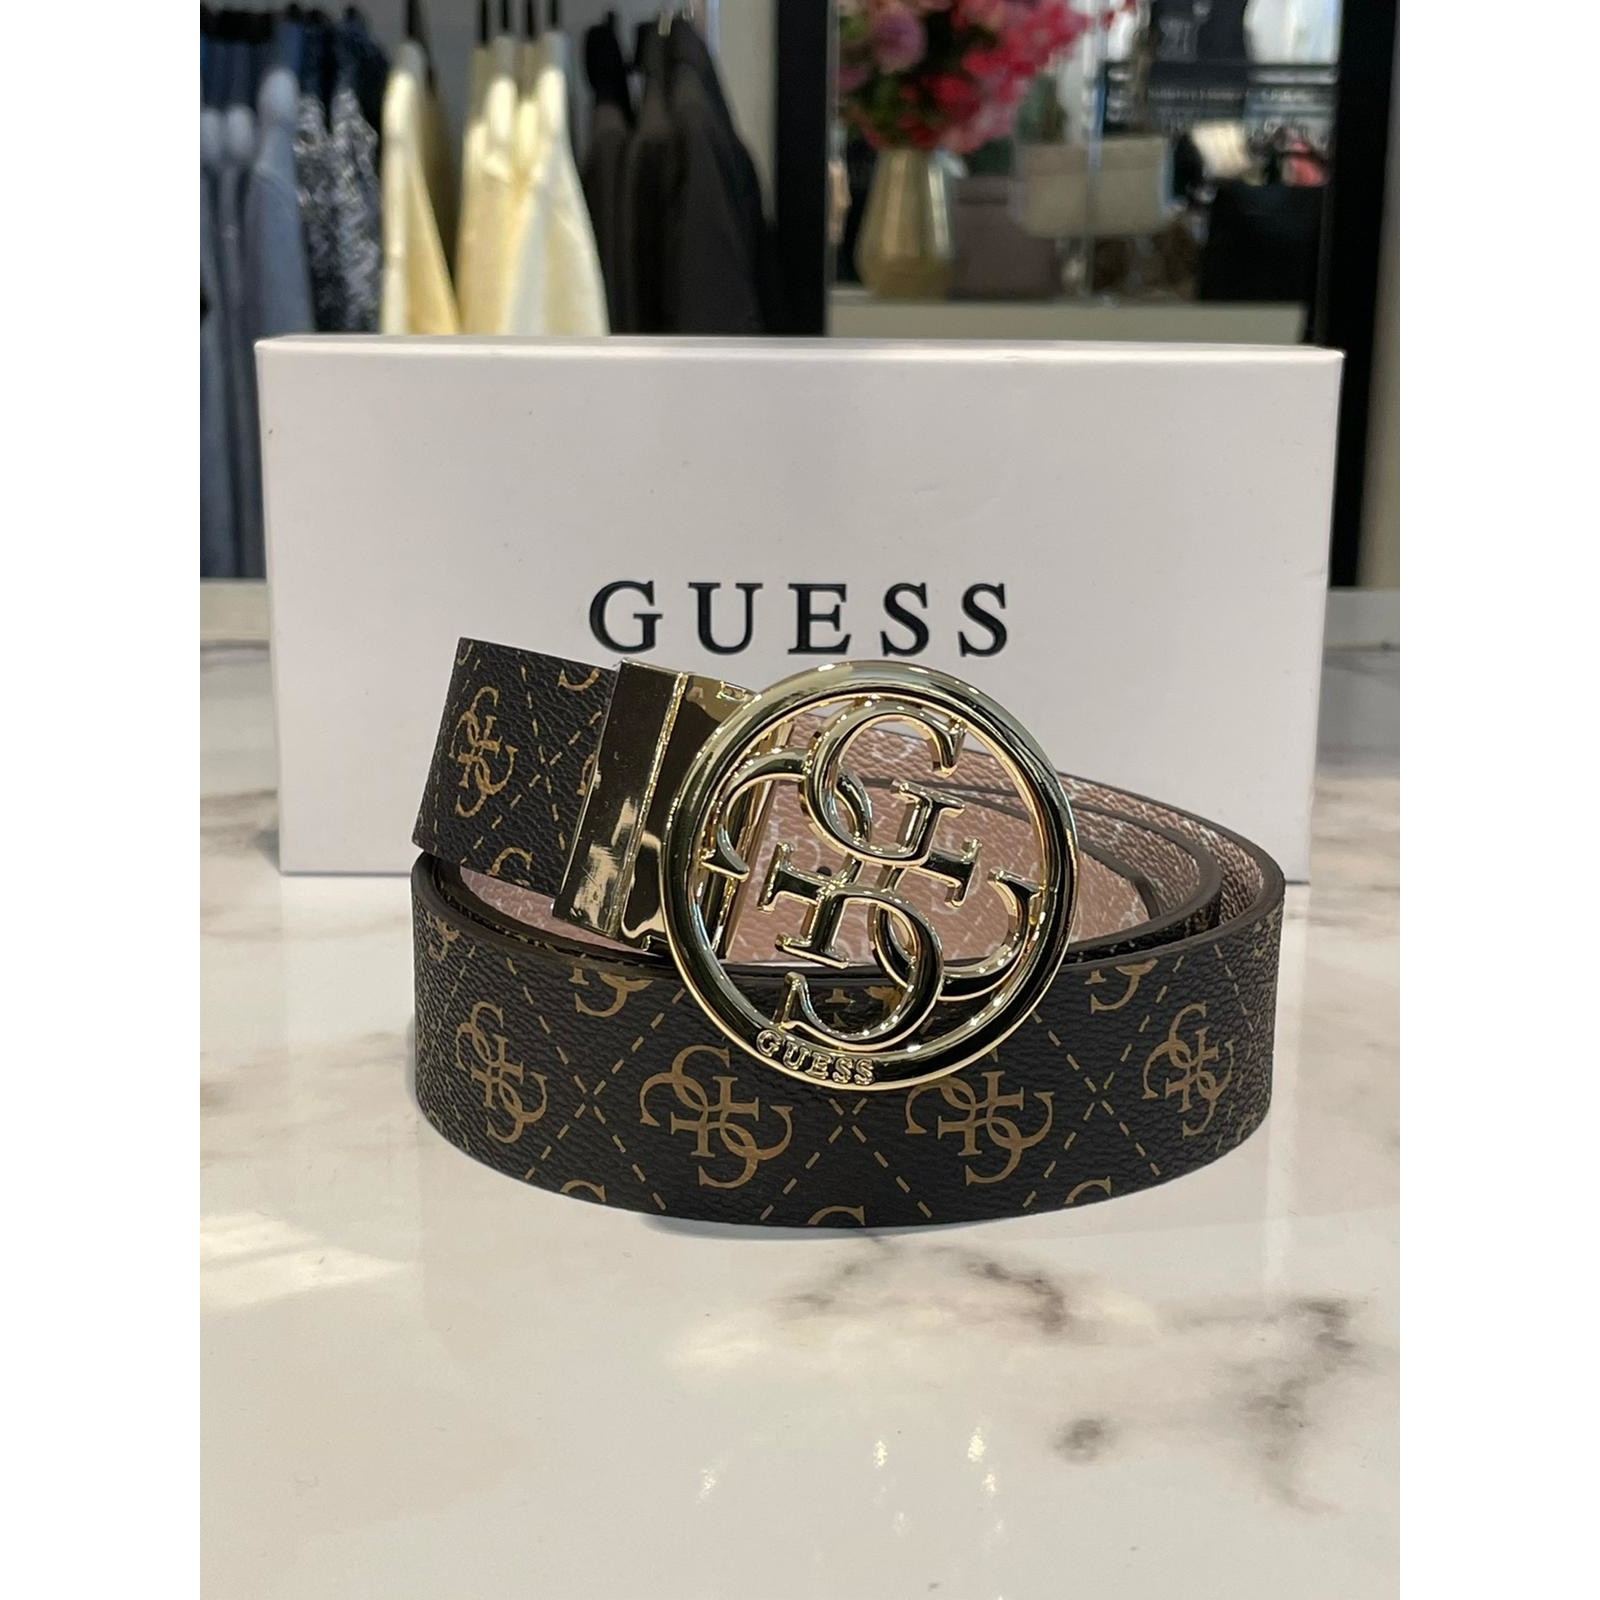 Guess Belt 2 in 1 Brown Logo/Pink Guess